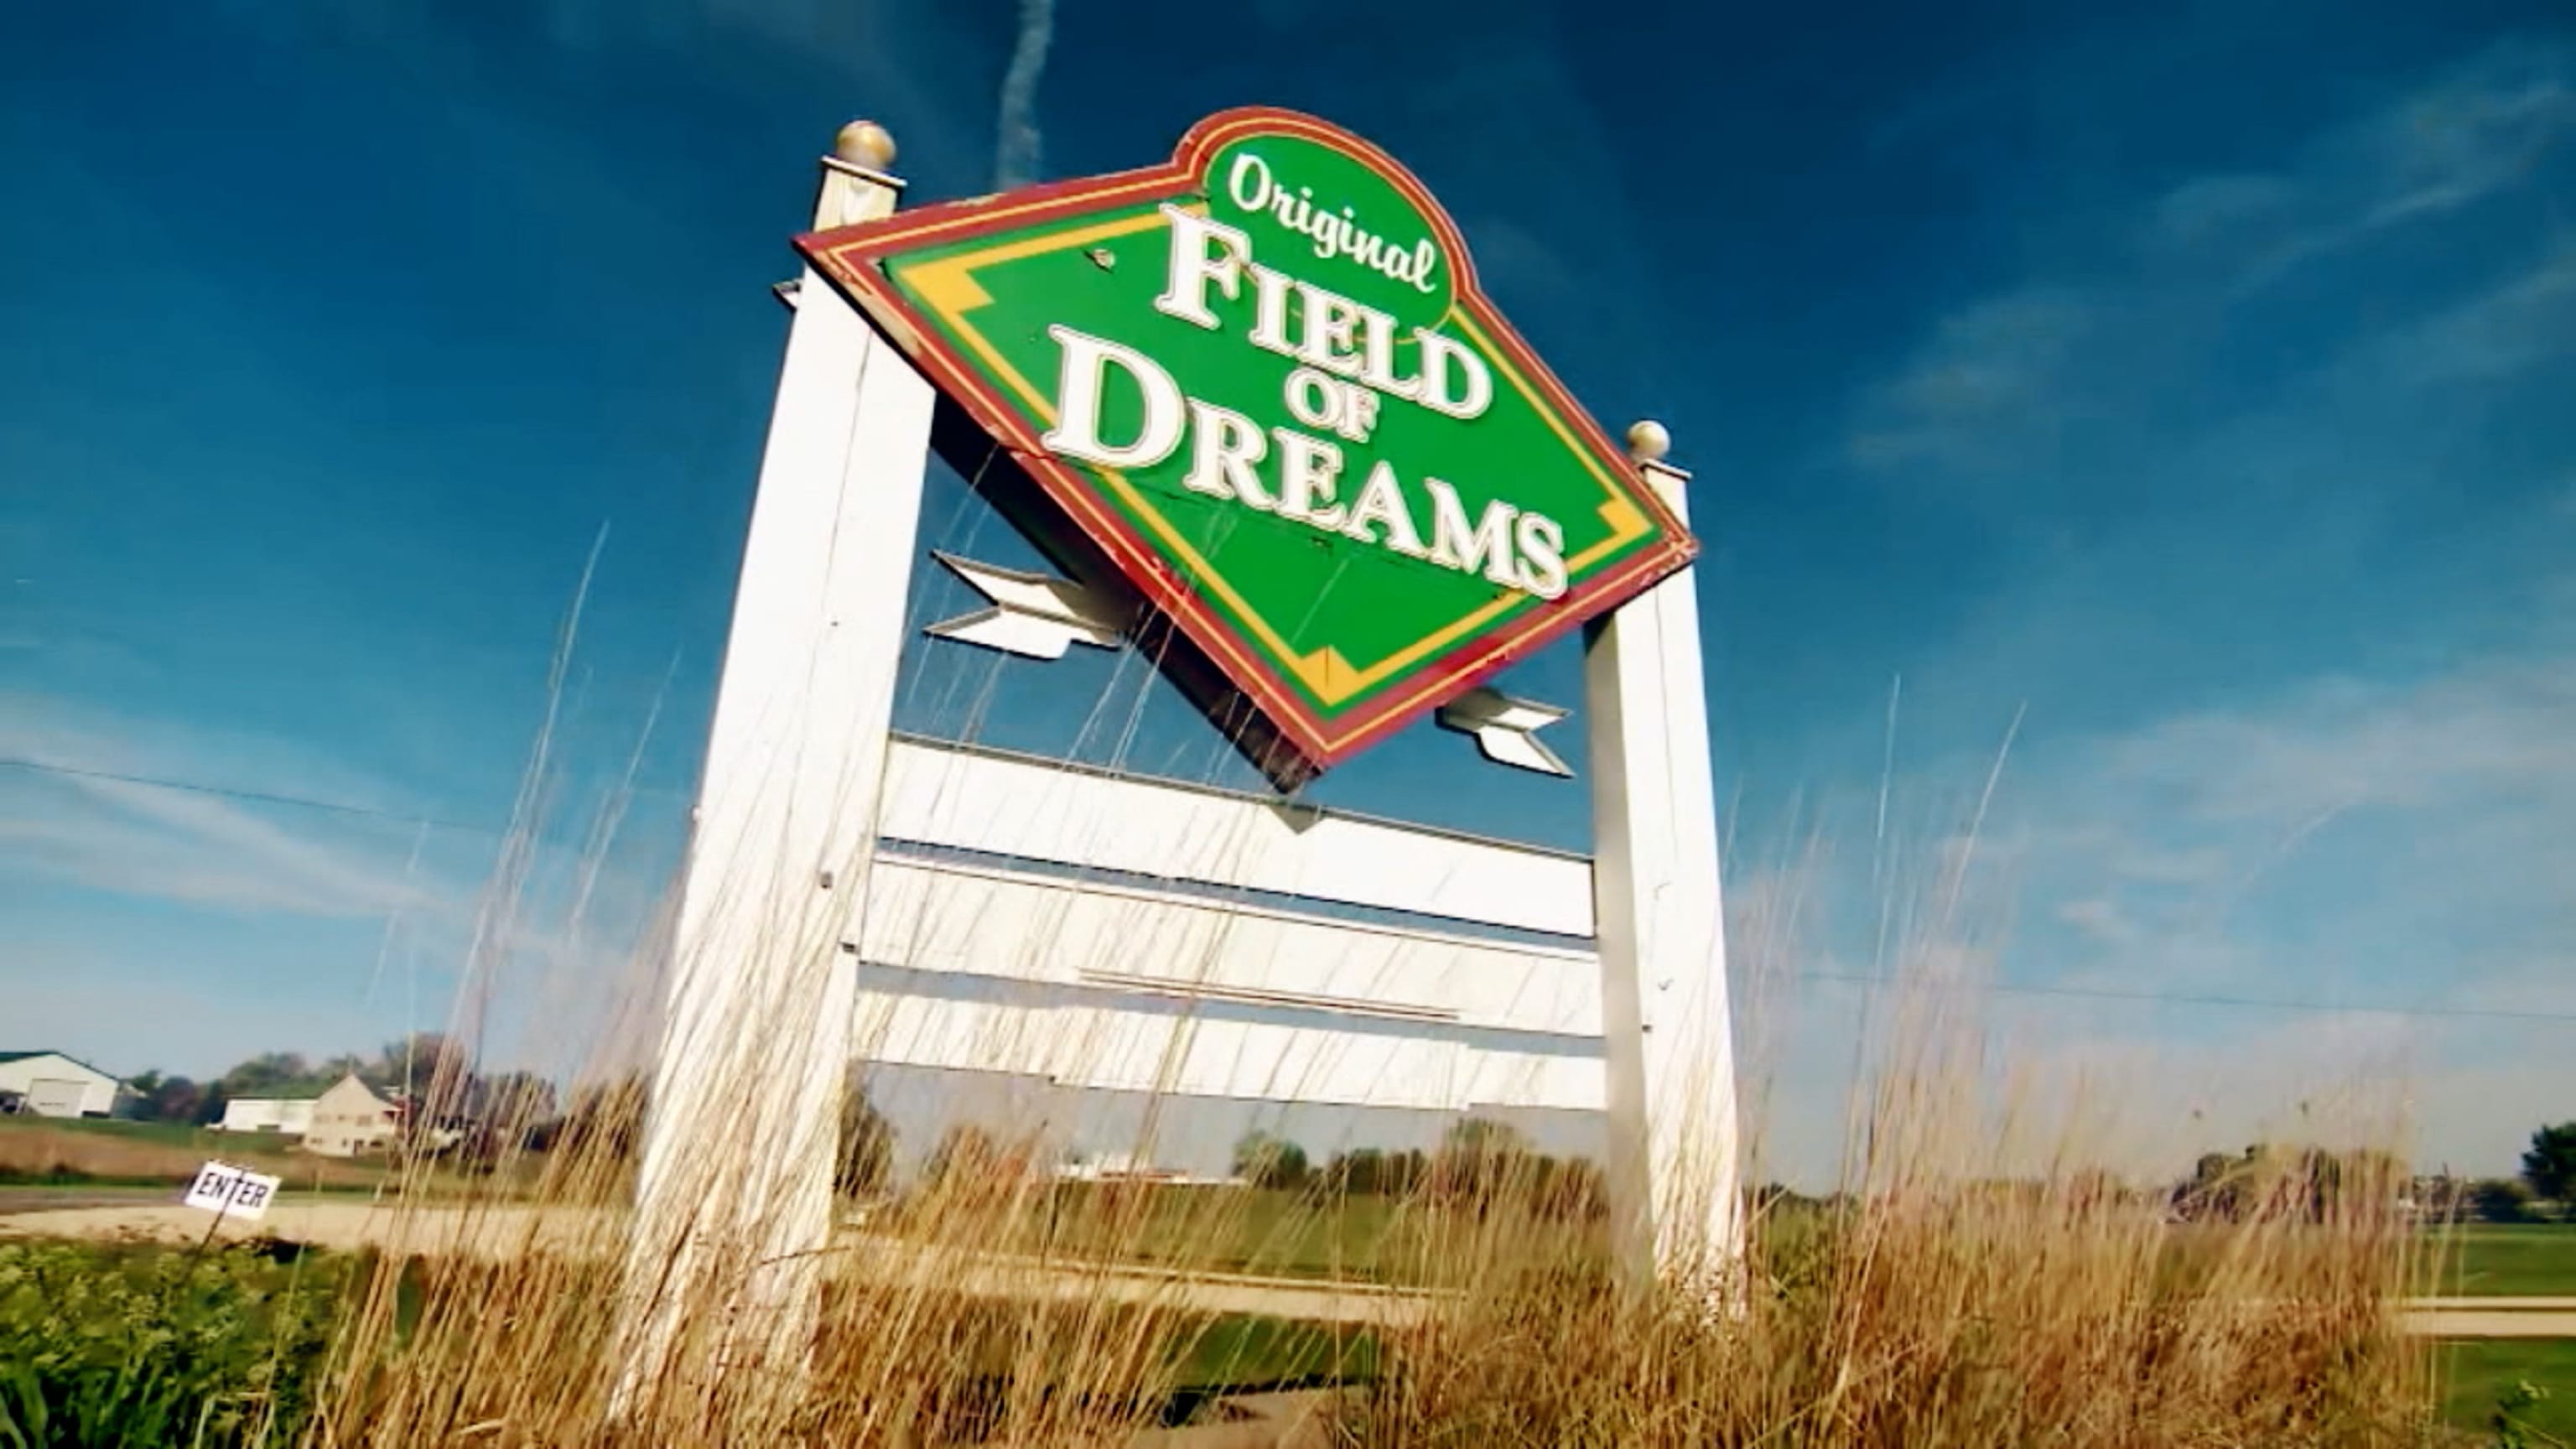 Significance of Field of Dreams